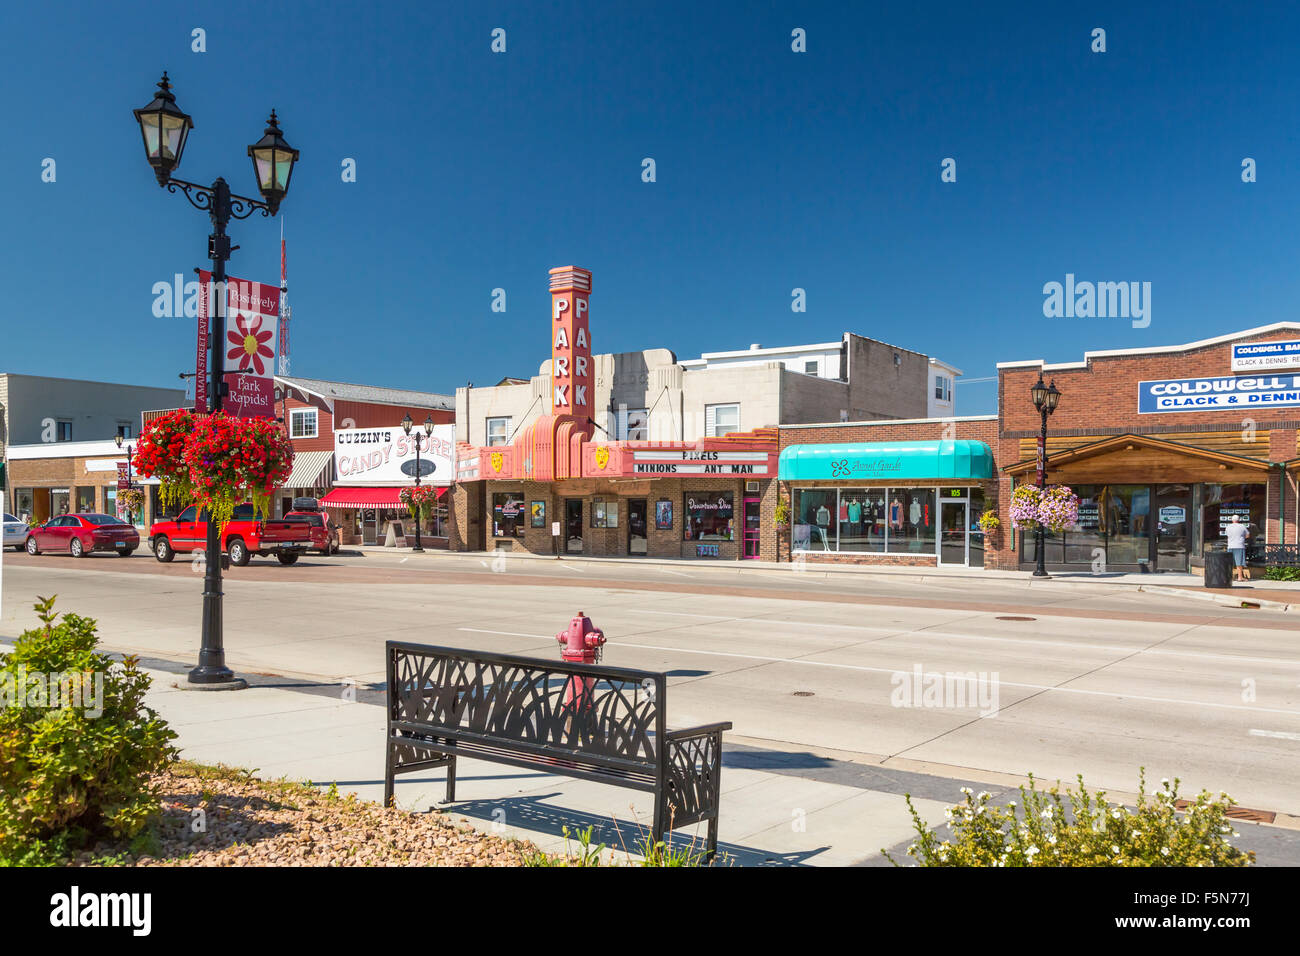 Main street shops and signs in Park Rapids, Minnesota, USA. Stock Photo